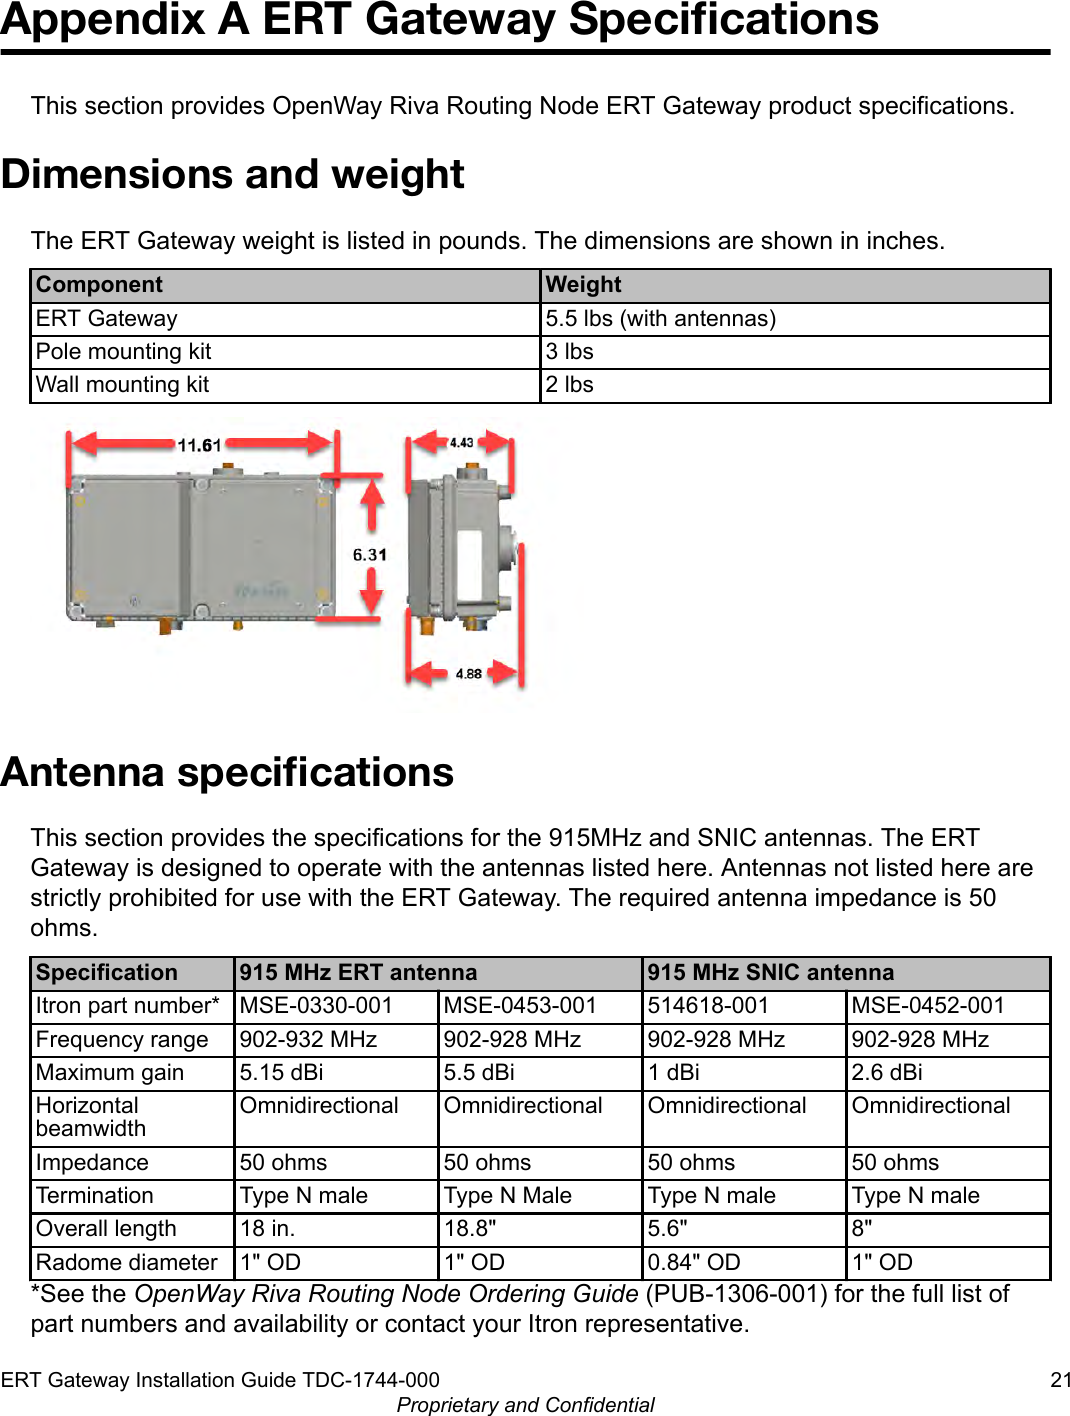 Appendix A ERT Gateway SpeciﬁcationsThis section provides OpenWay Riva Routing Node ERT Gateway product specifications.Dimensions and weightThe ERT Gateway weight is listed in pounds. The dimensions are shown in inches.Component WeightERT Gateway 5.5 lbs (with antennas)Pole mounting kit 3 lbsWall mounting kit 2 lbsAntenna speciﬁcationsThis section provides the specifications for the 915MHz and SNIC antennas. The ERTGateway is designed to operate with the antennas listed here. Antennas not listed here arestrictly prohibited for use with the ERT Gateway. The required antenna impedance is 50ohms.Specification 915 MHz ERT antenna 915 MHz SNIC antennaItron part number* MSE-0330-001 MSE-0453-001 514618-001 MSE-0452-001Frequency range 902-932 MHz 902-928 MHz 902-928 MHz 902-928 MHzMaximum gain 5.15 dBi 5.5 dBi 1 dBi 2.6 dBiHorizontalbeamwidthOmnidirectional Omnidirectional Omnidirectional OmnidirectionalImpedance 50 ohms 50 ohms 50 ohms 50 ohmsTermination Type N male Type N Male Type N male Type N maleOverall length 18 in. 18.8&quot; 5.6&quot; 8&quot;Radome diameter 1&quot; OD 1&quot; OD 0.84&quot; OD 1&quot; OD*See the OpenWay Riva Routing Node Ordering Guide (PUB-1306-001) for the full list ofpart numbers and availability or contact your Itron representative.ERT Gateway Installation Guide TDC-1744-000 21Proprietary and Confidential